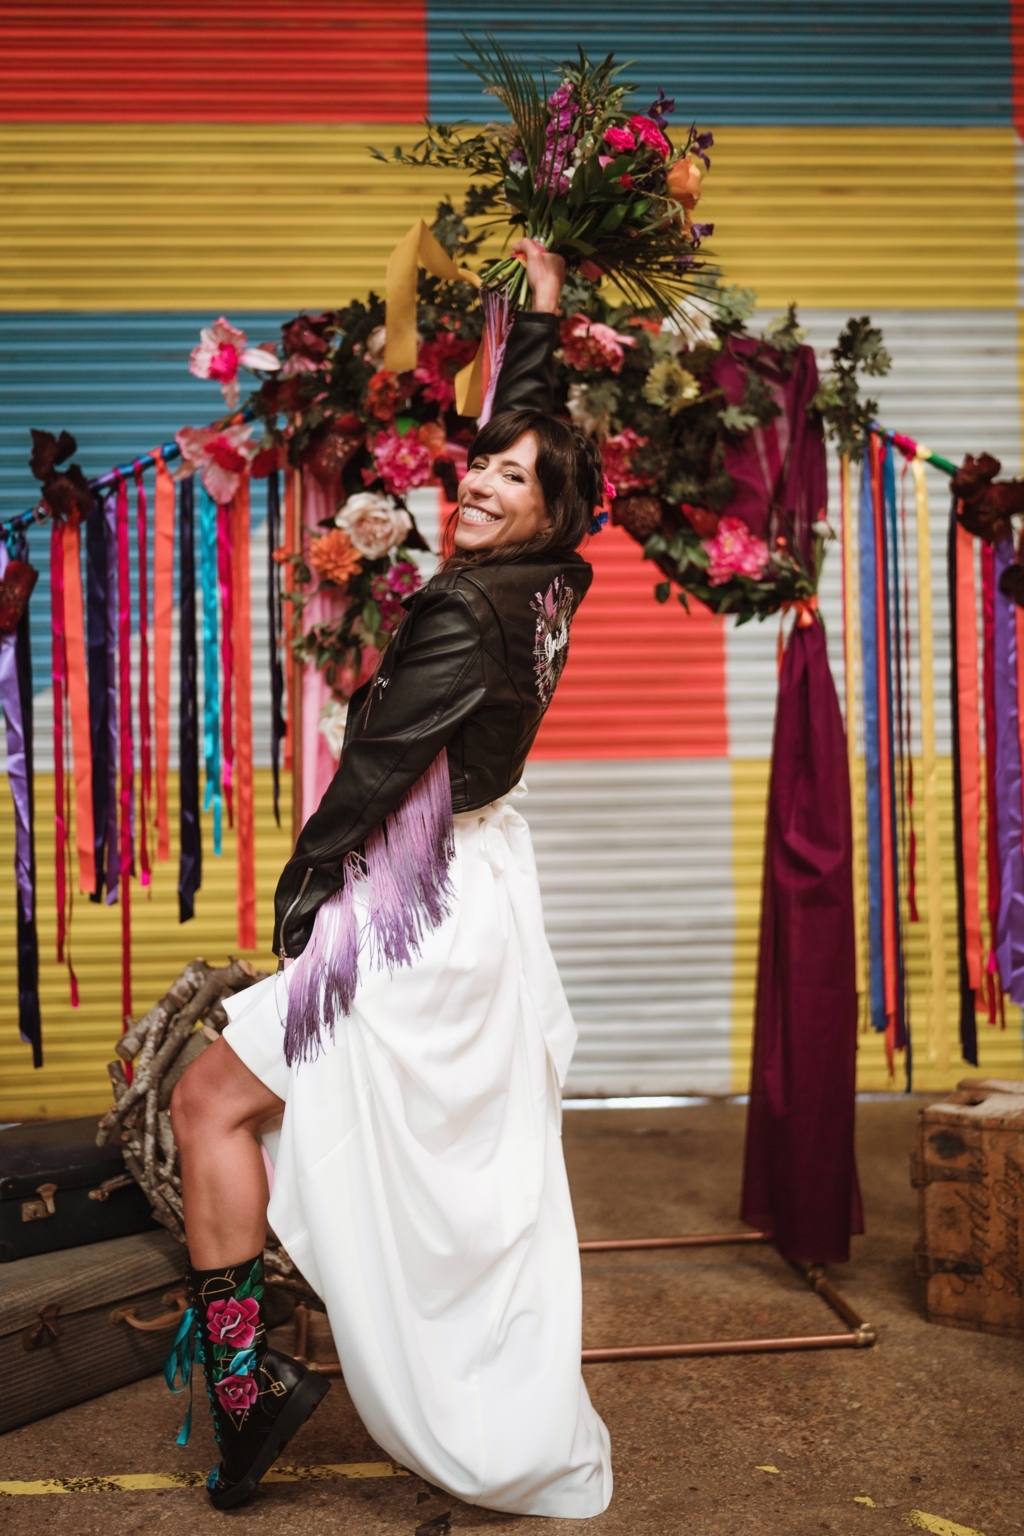 UK wedding inspiration - smiling bride lifts up her skirt to show off bespoke hand painted doc marten boots whilst holding a bouquet up to the sky in front of a party streamer background. Her leather jacket has bright pink tassels